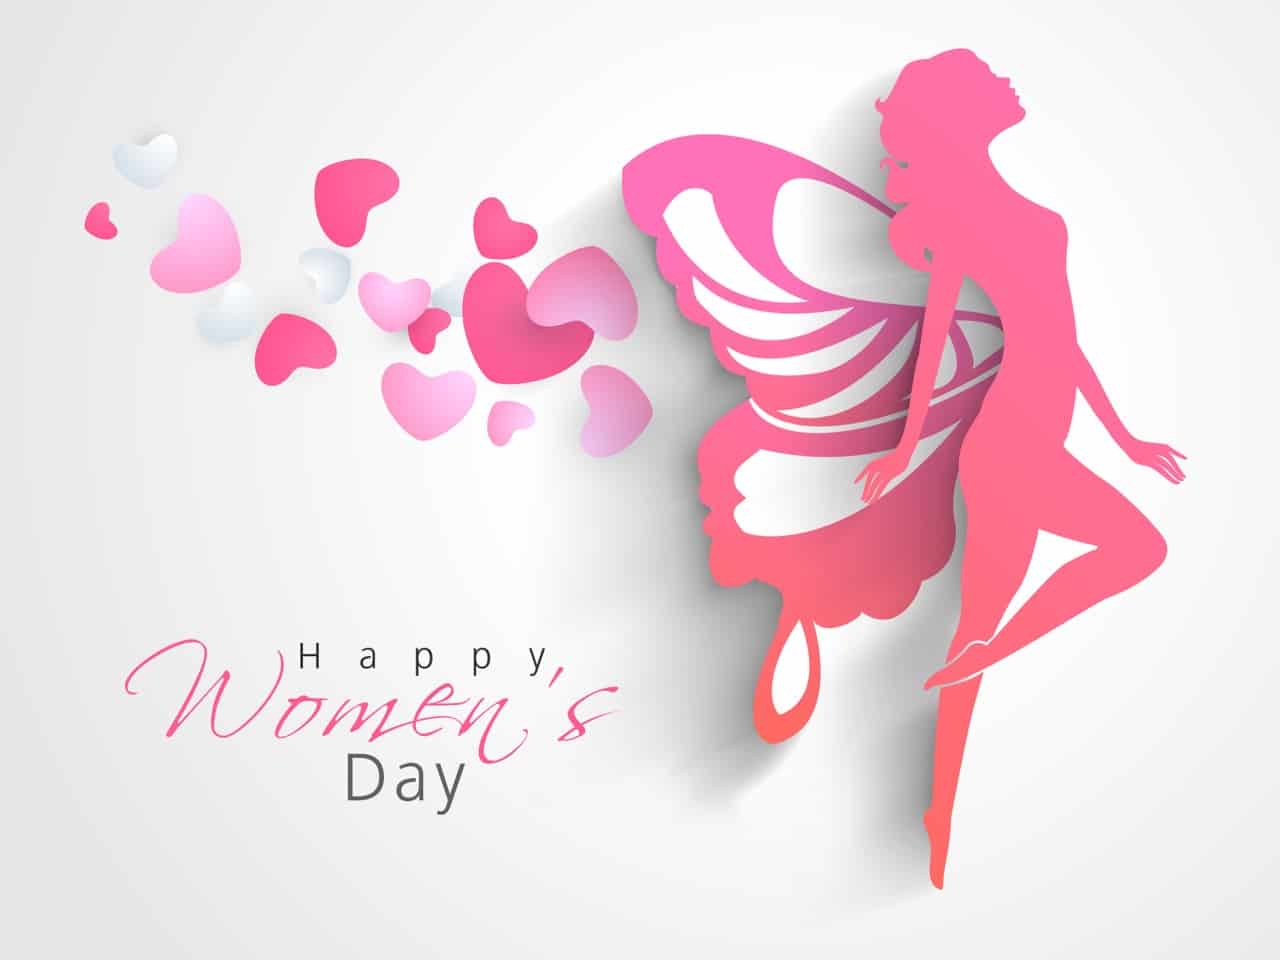 Happy Women Day Images